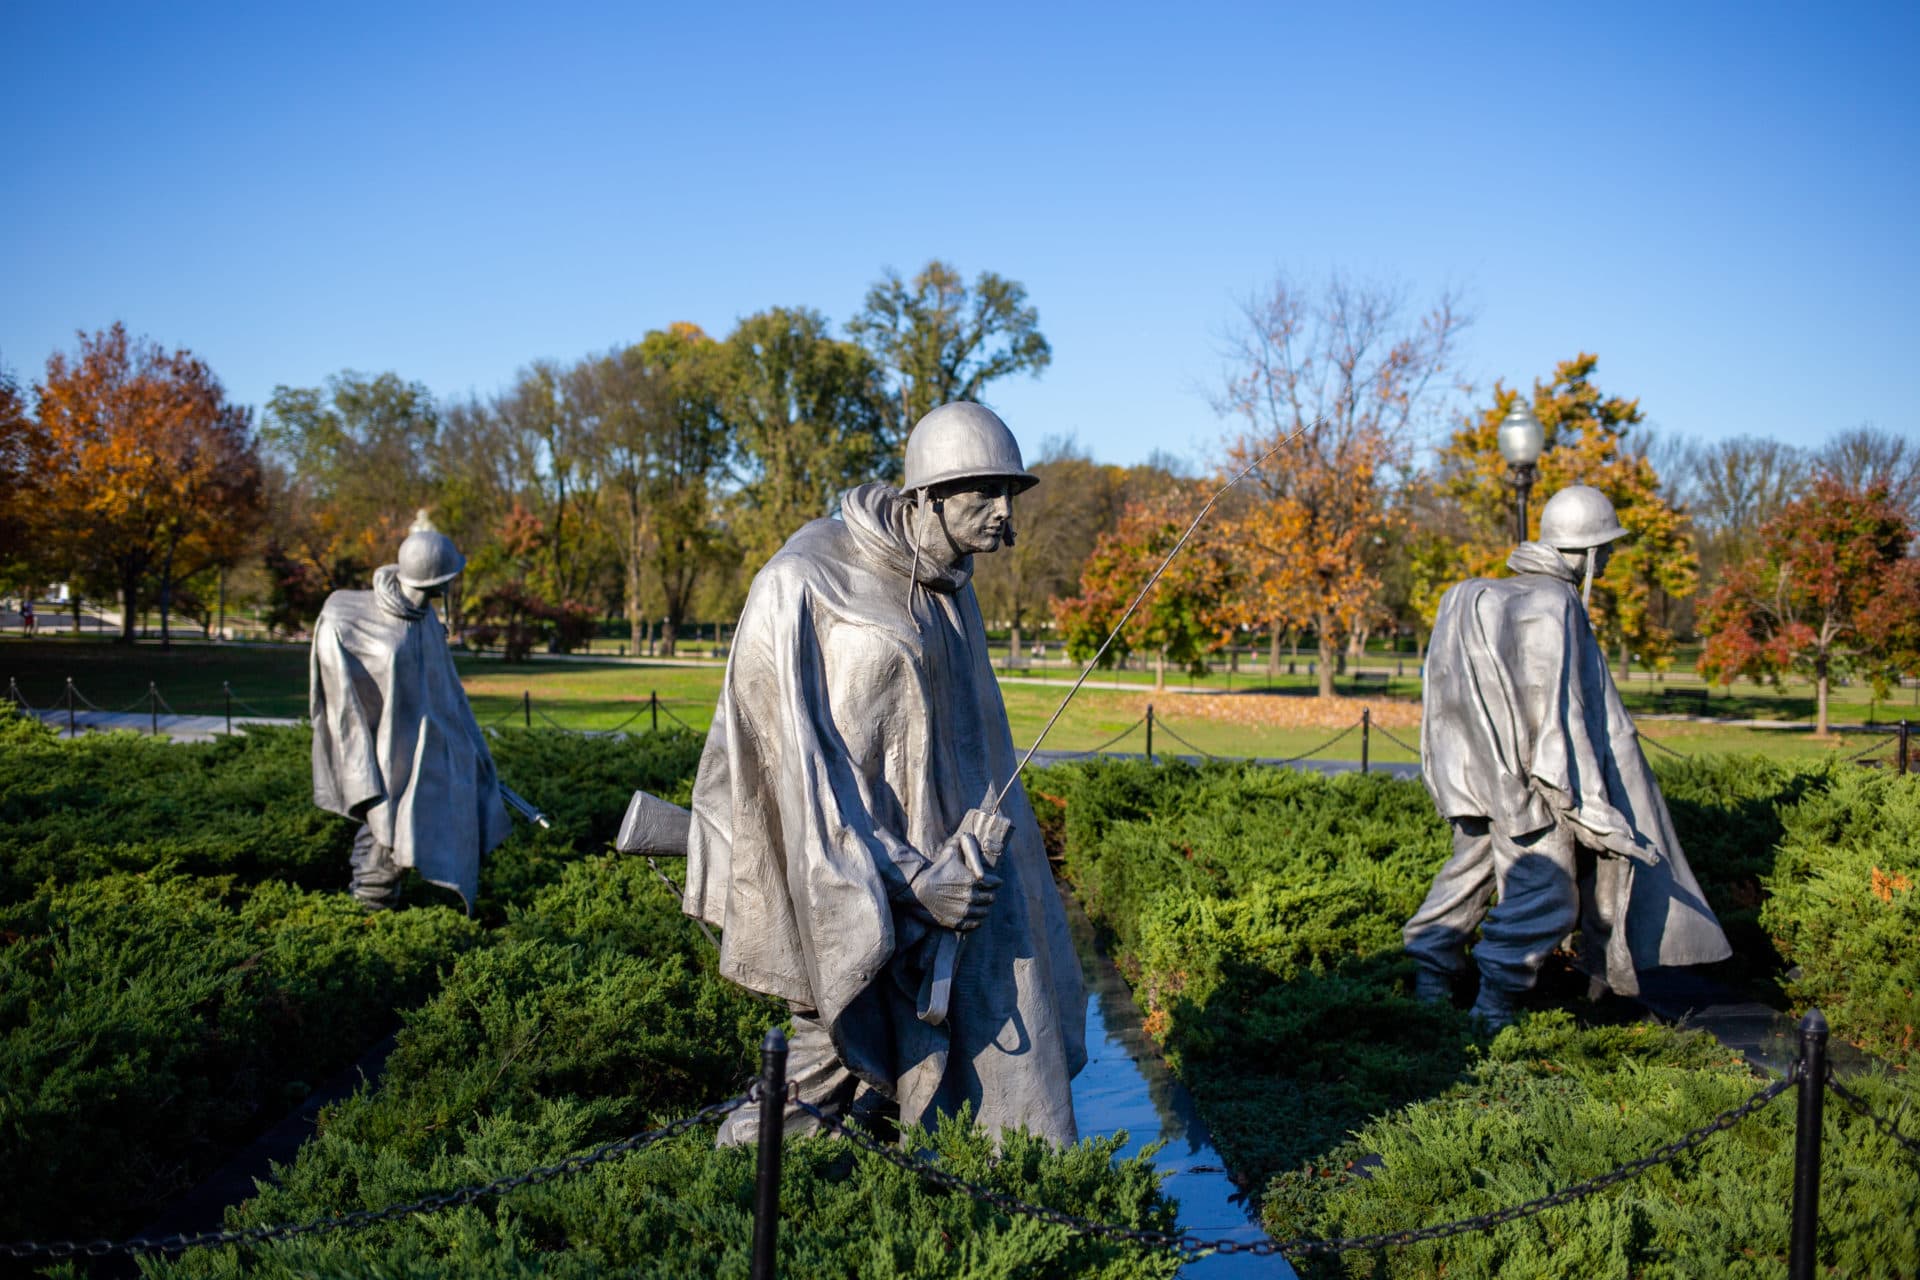 Located near the Lincoln Memorial, the Korean War Veterans Memorial was dedicated in 1995 and features a Wall of Remembrance and 19 stainless steel statues depicting soldiers in combat.